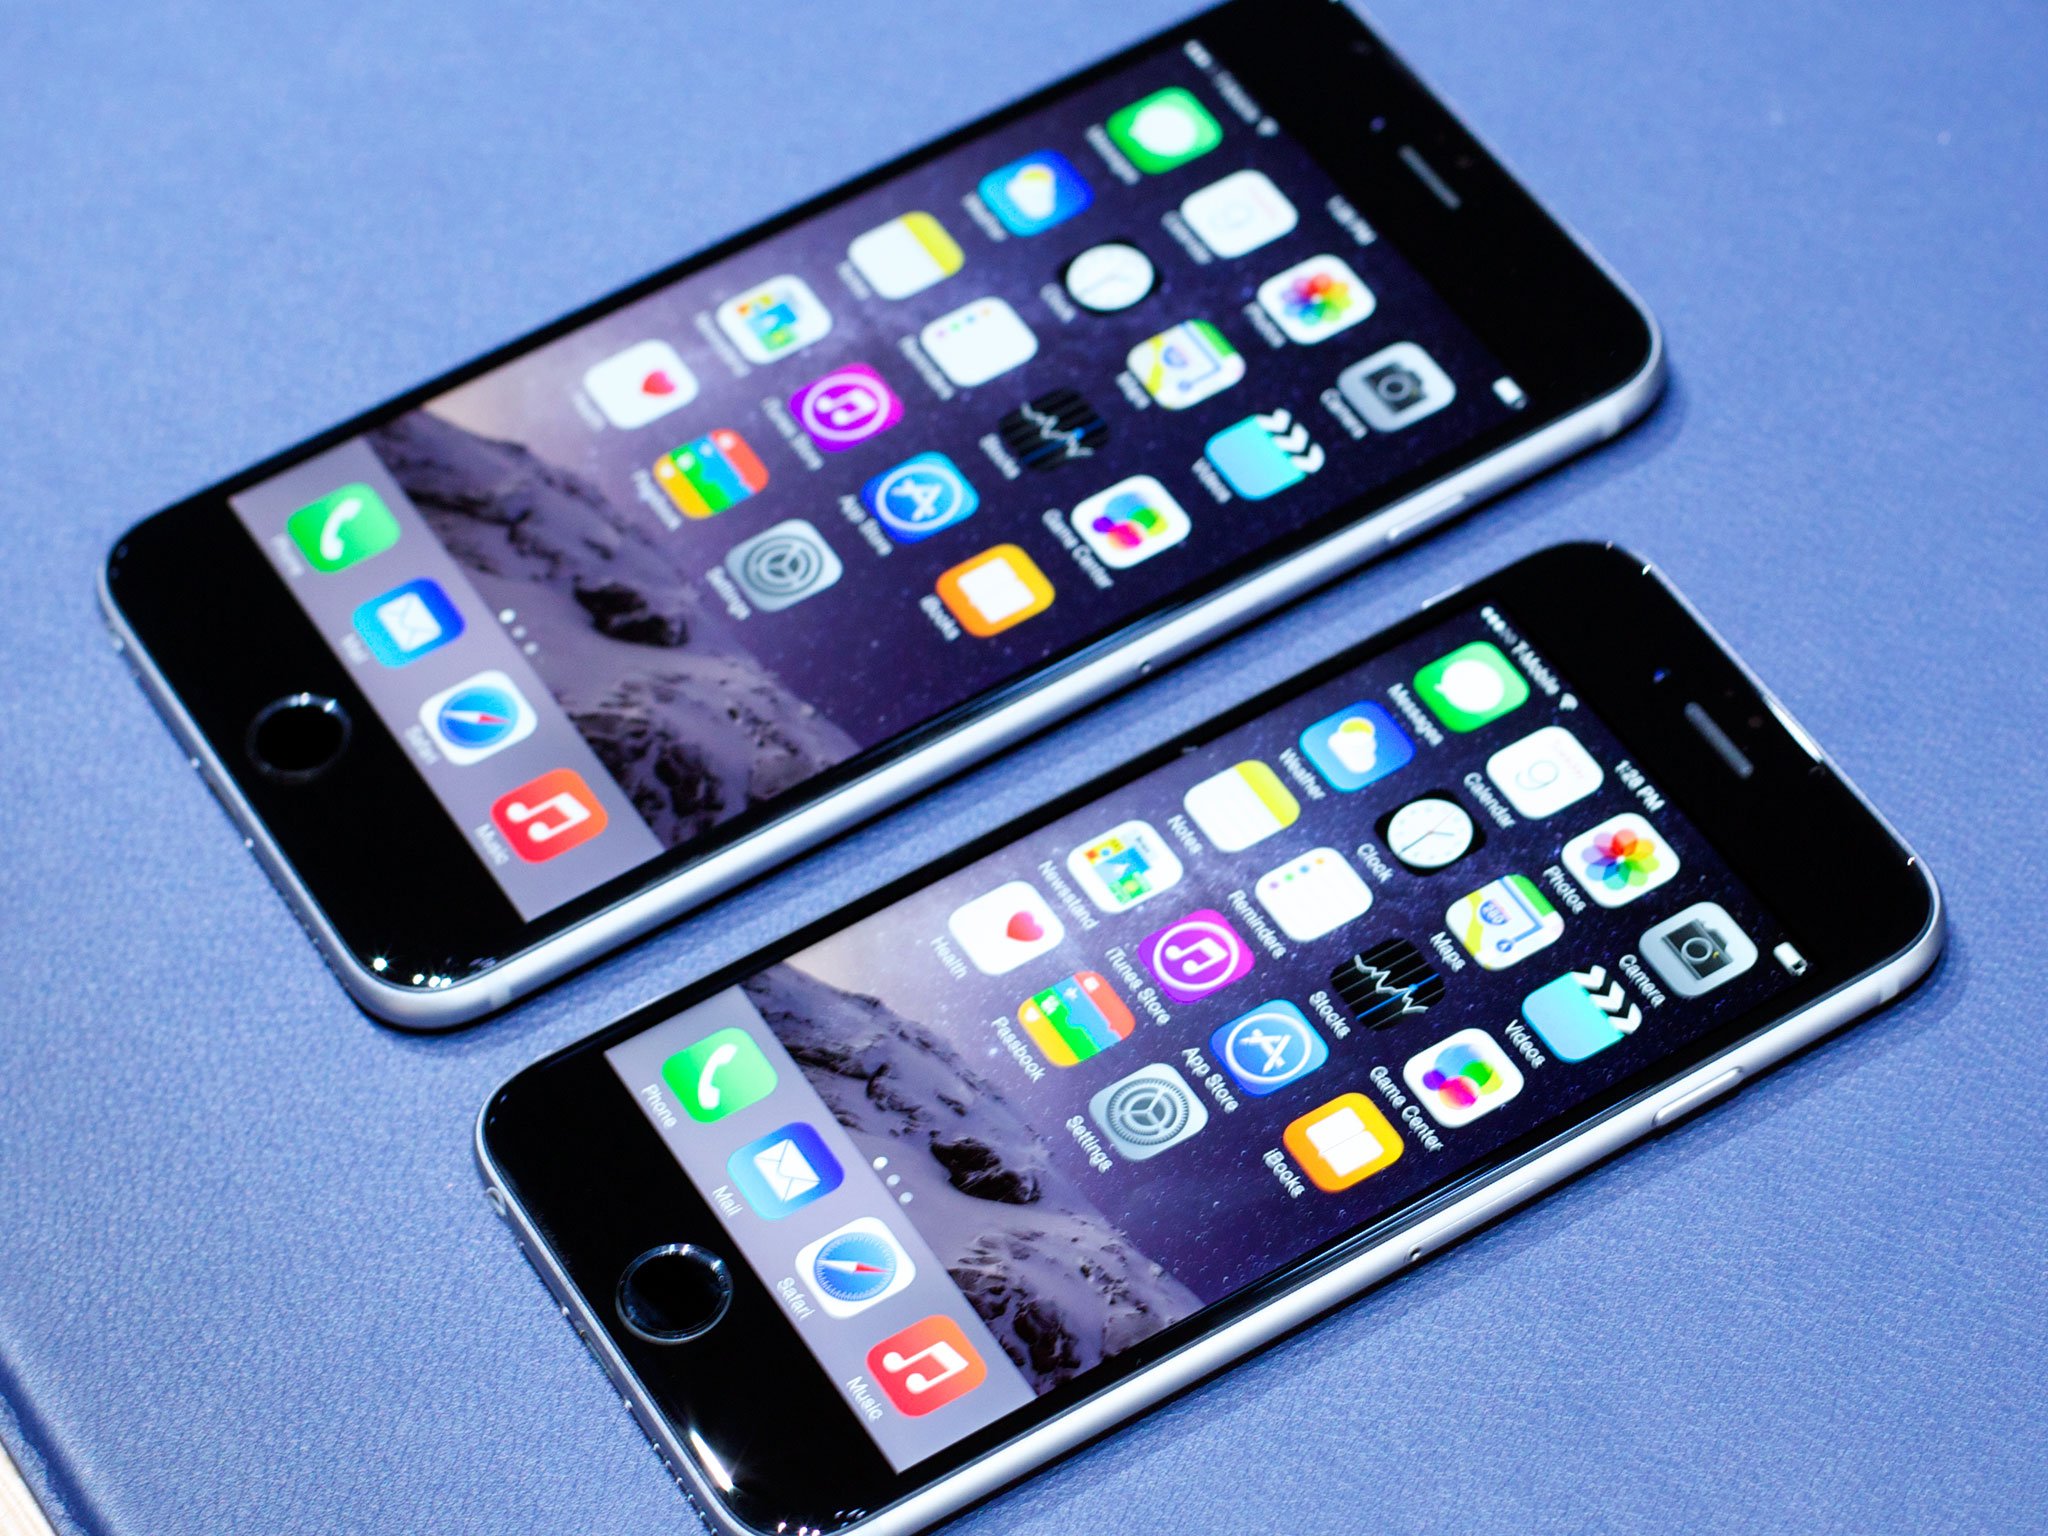 Replacing an iPhone 6 Plus screen could cost you $329